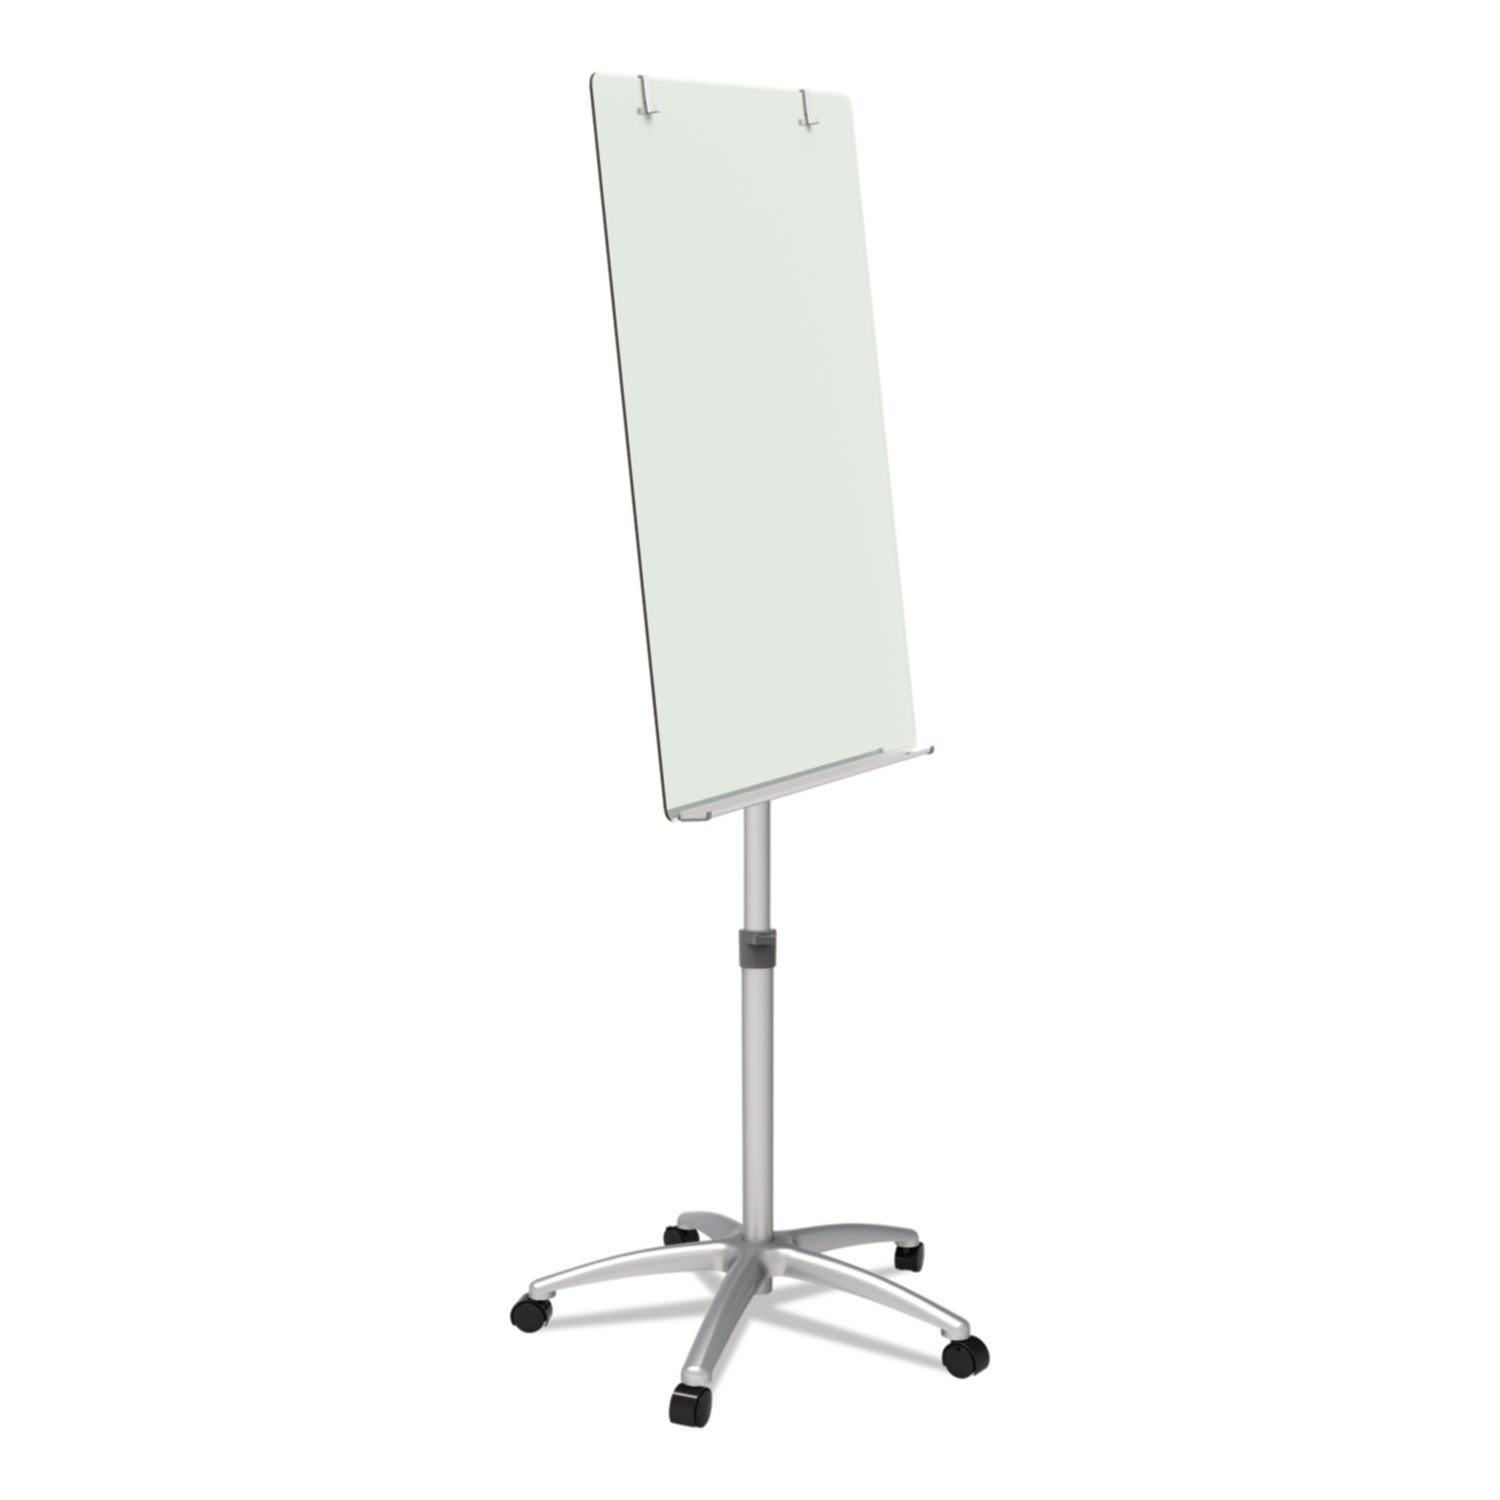 Infinity Glass Mobile Presentation Easel, 3 ft x 2 ft, Silver/White